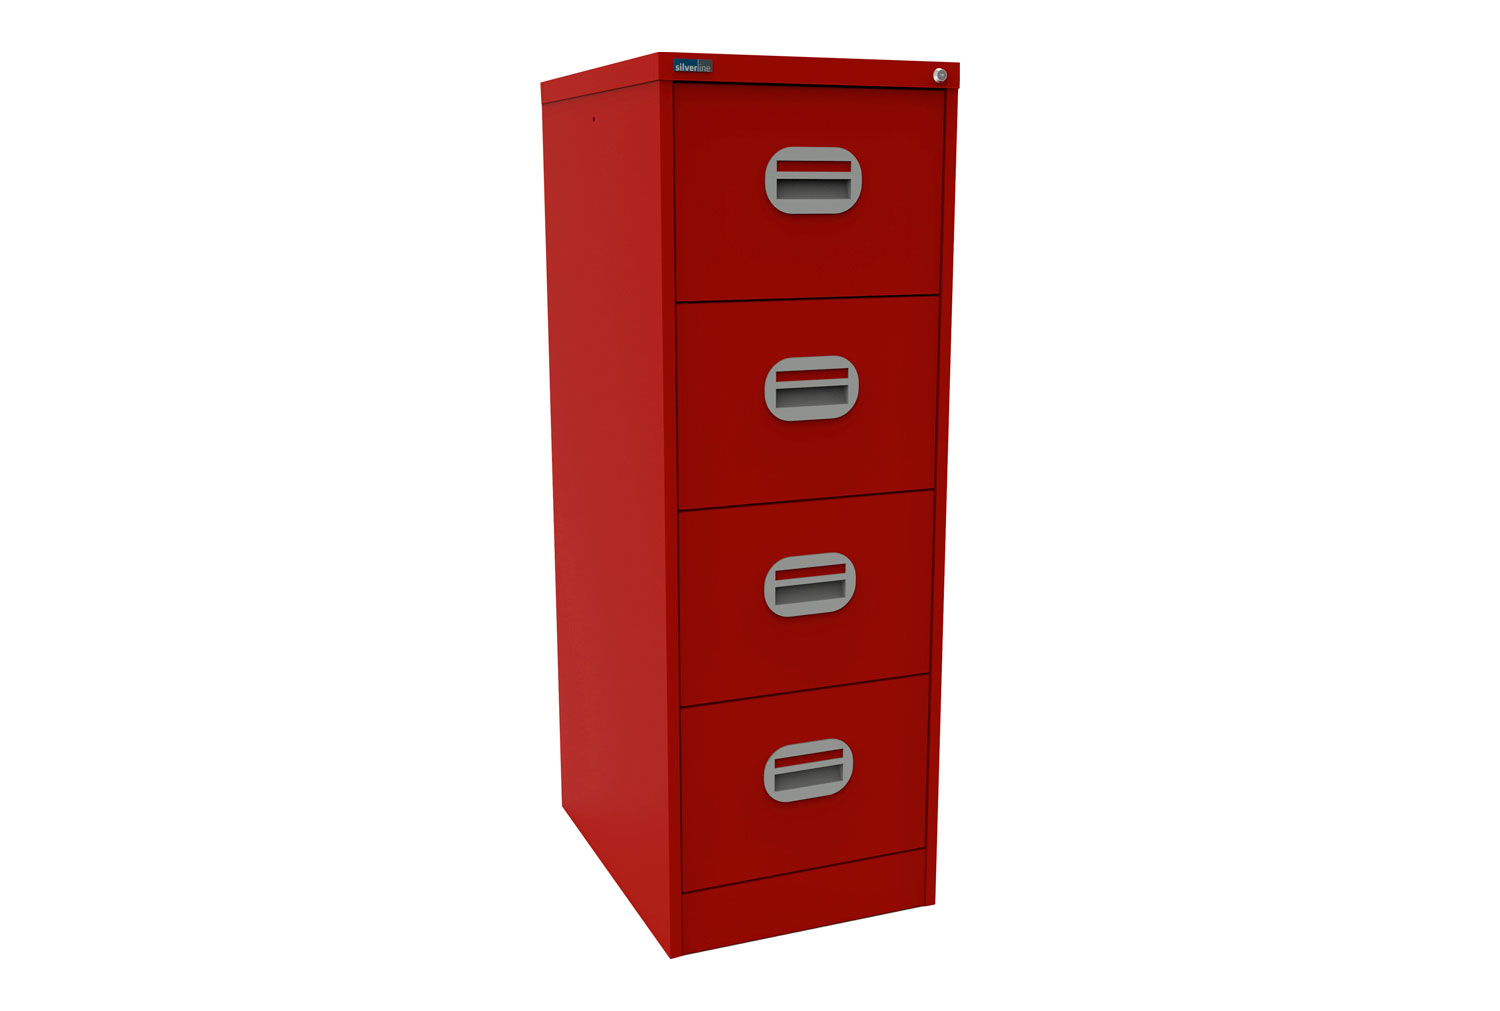 Silverline Kontrax 4 Drawer Office Filing Cabinet, 4 Drawer - 46wx62dx132h (cm), Red, Express Delivery